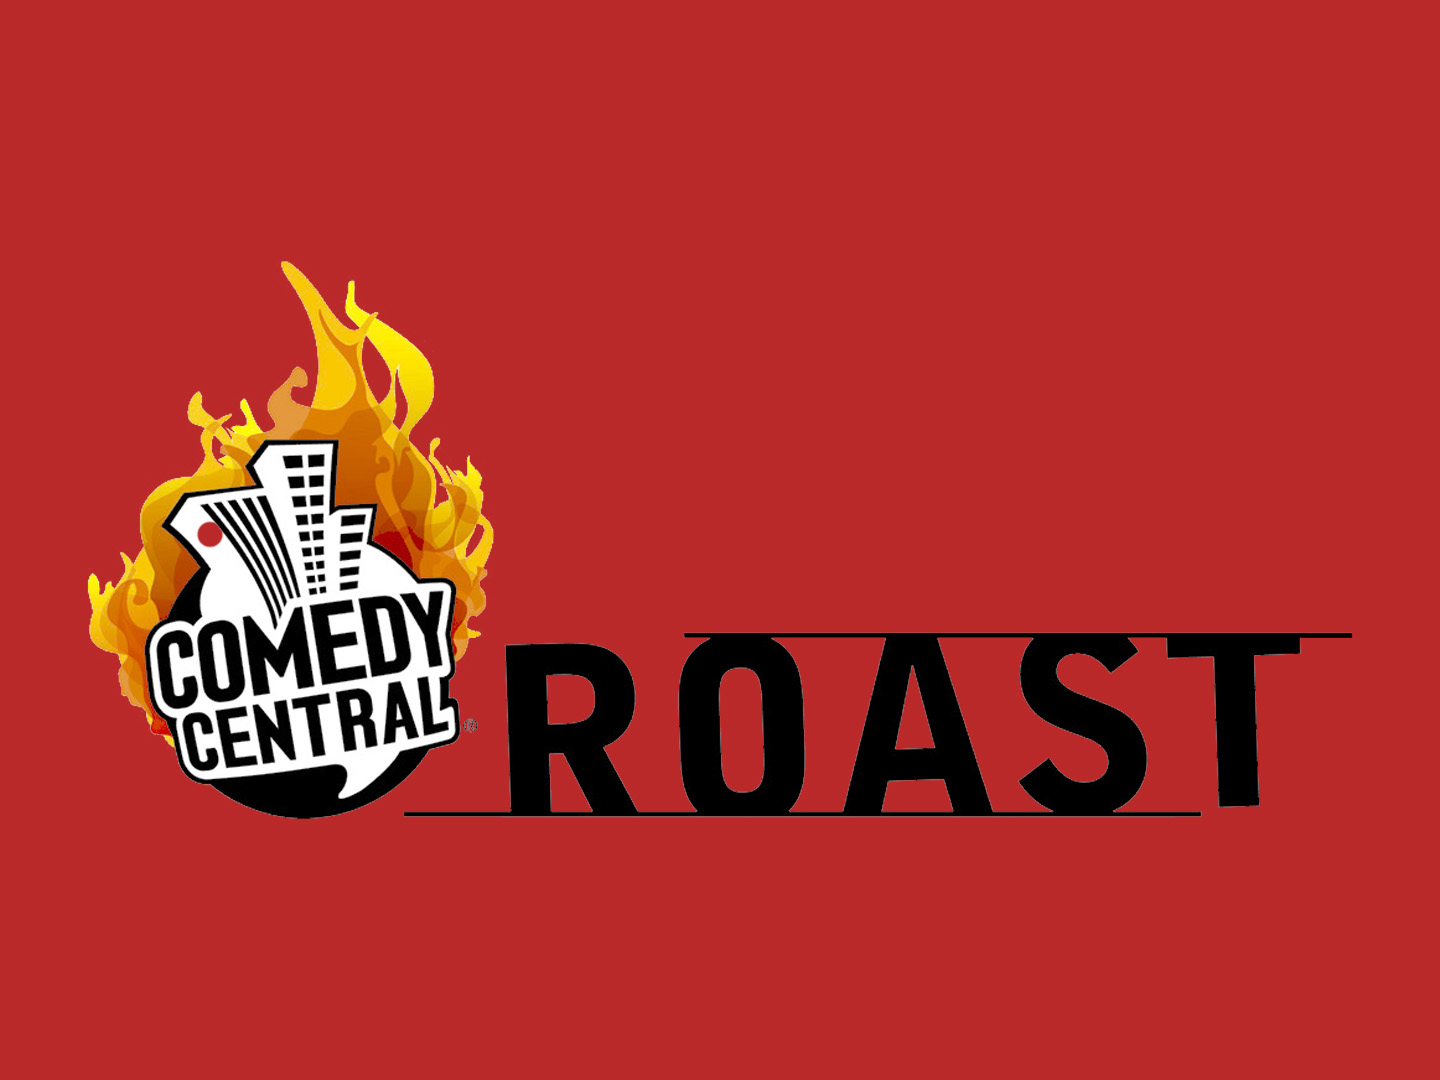 writing a situation comedy central roast